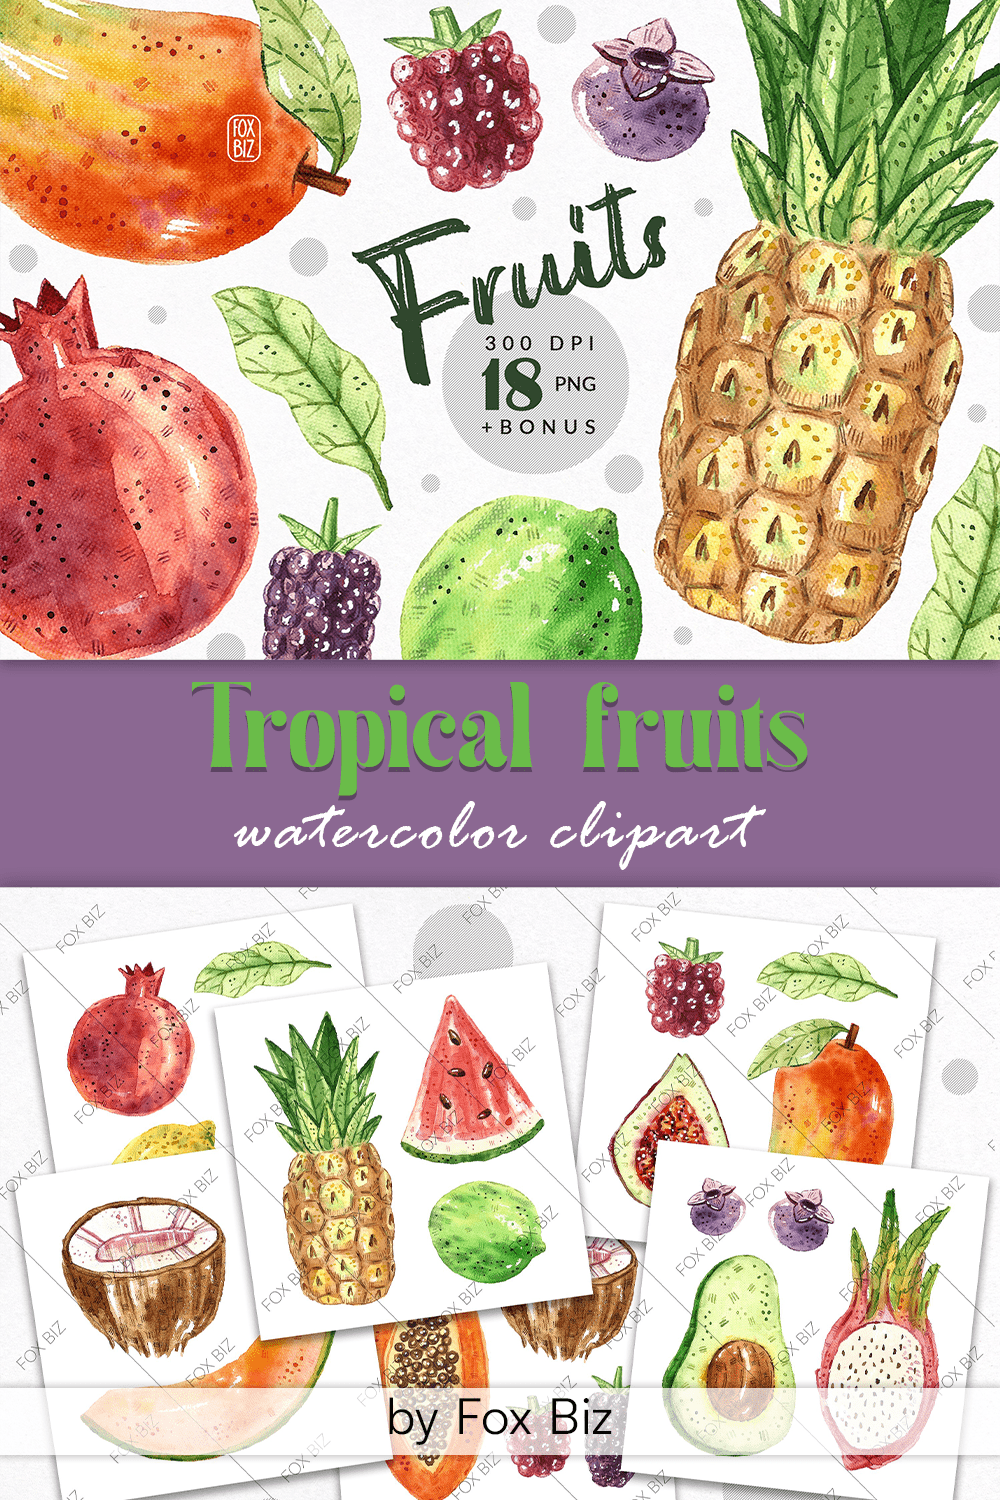 Tropical fruits watercolor clipart - pinterest image preview.